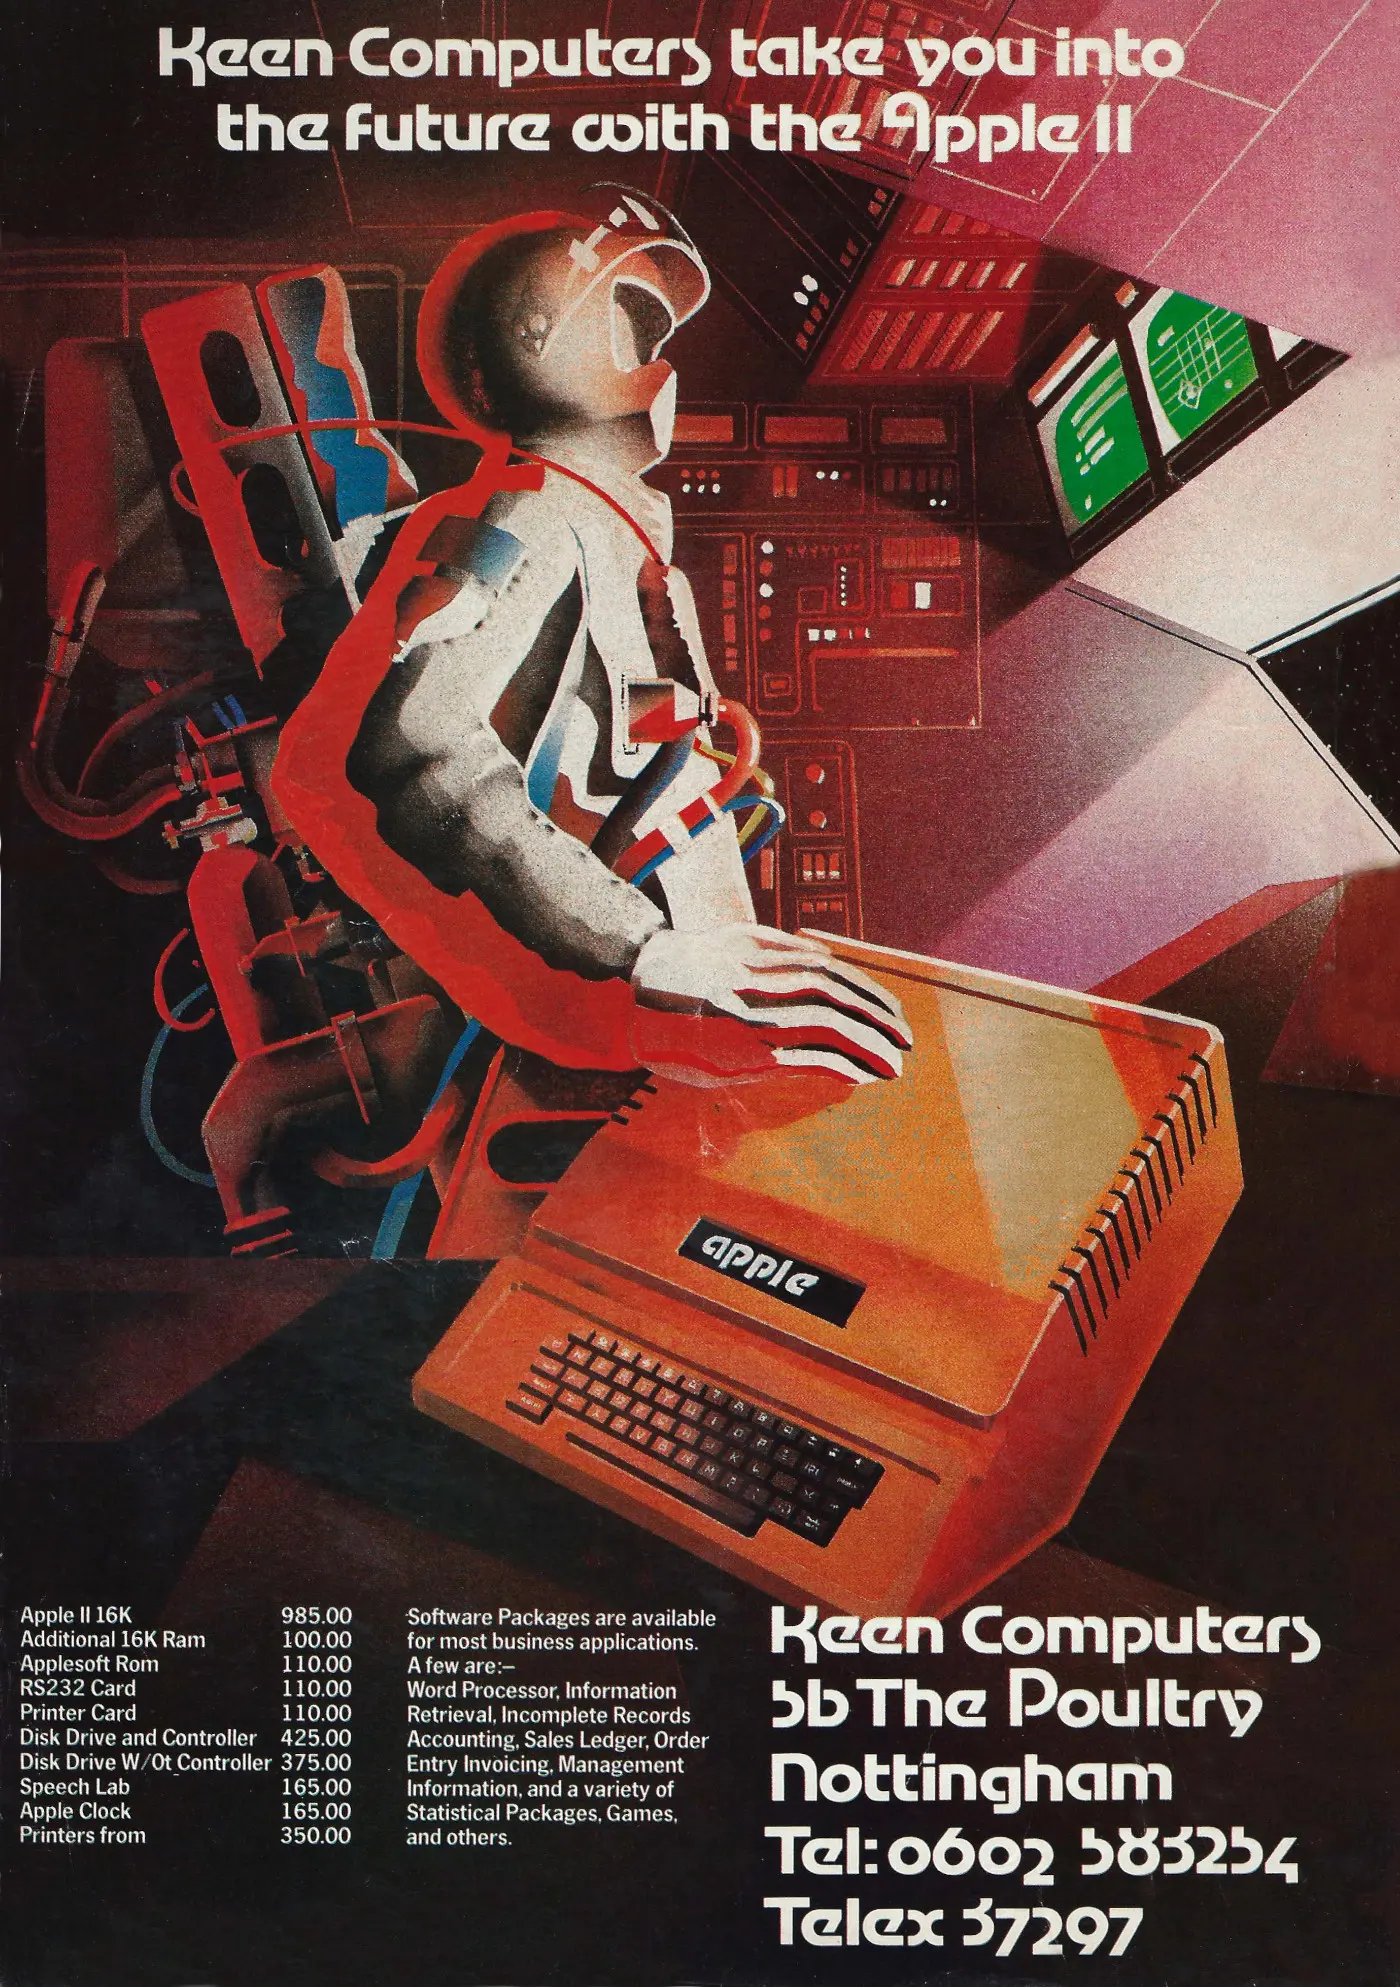 Apple Advert: Keen Computers takes you into the future with the Apple II, from Personal Computer World, August 1979